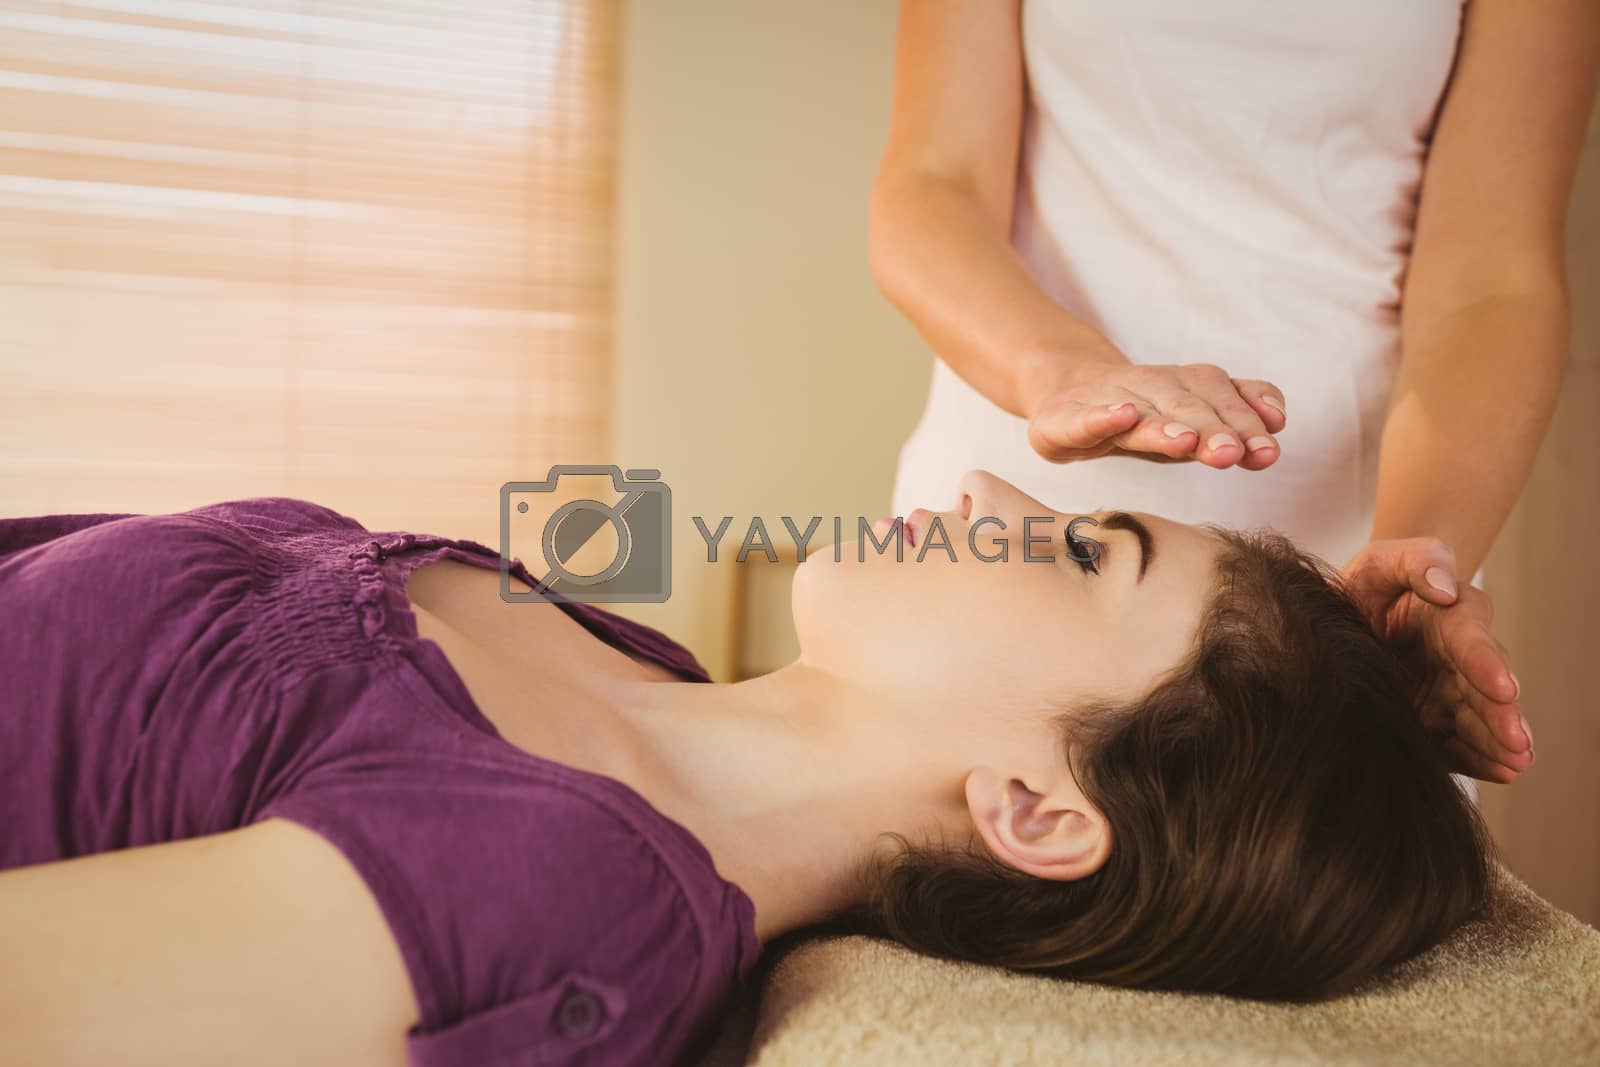 Royalty free image of Young woman having a reiki treatment by Wavebreakmedia